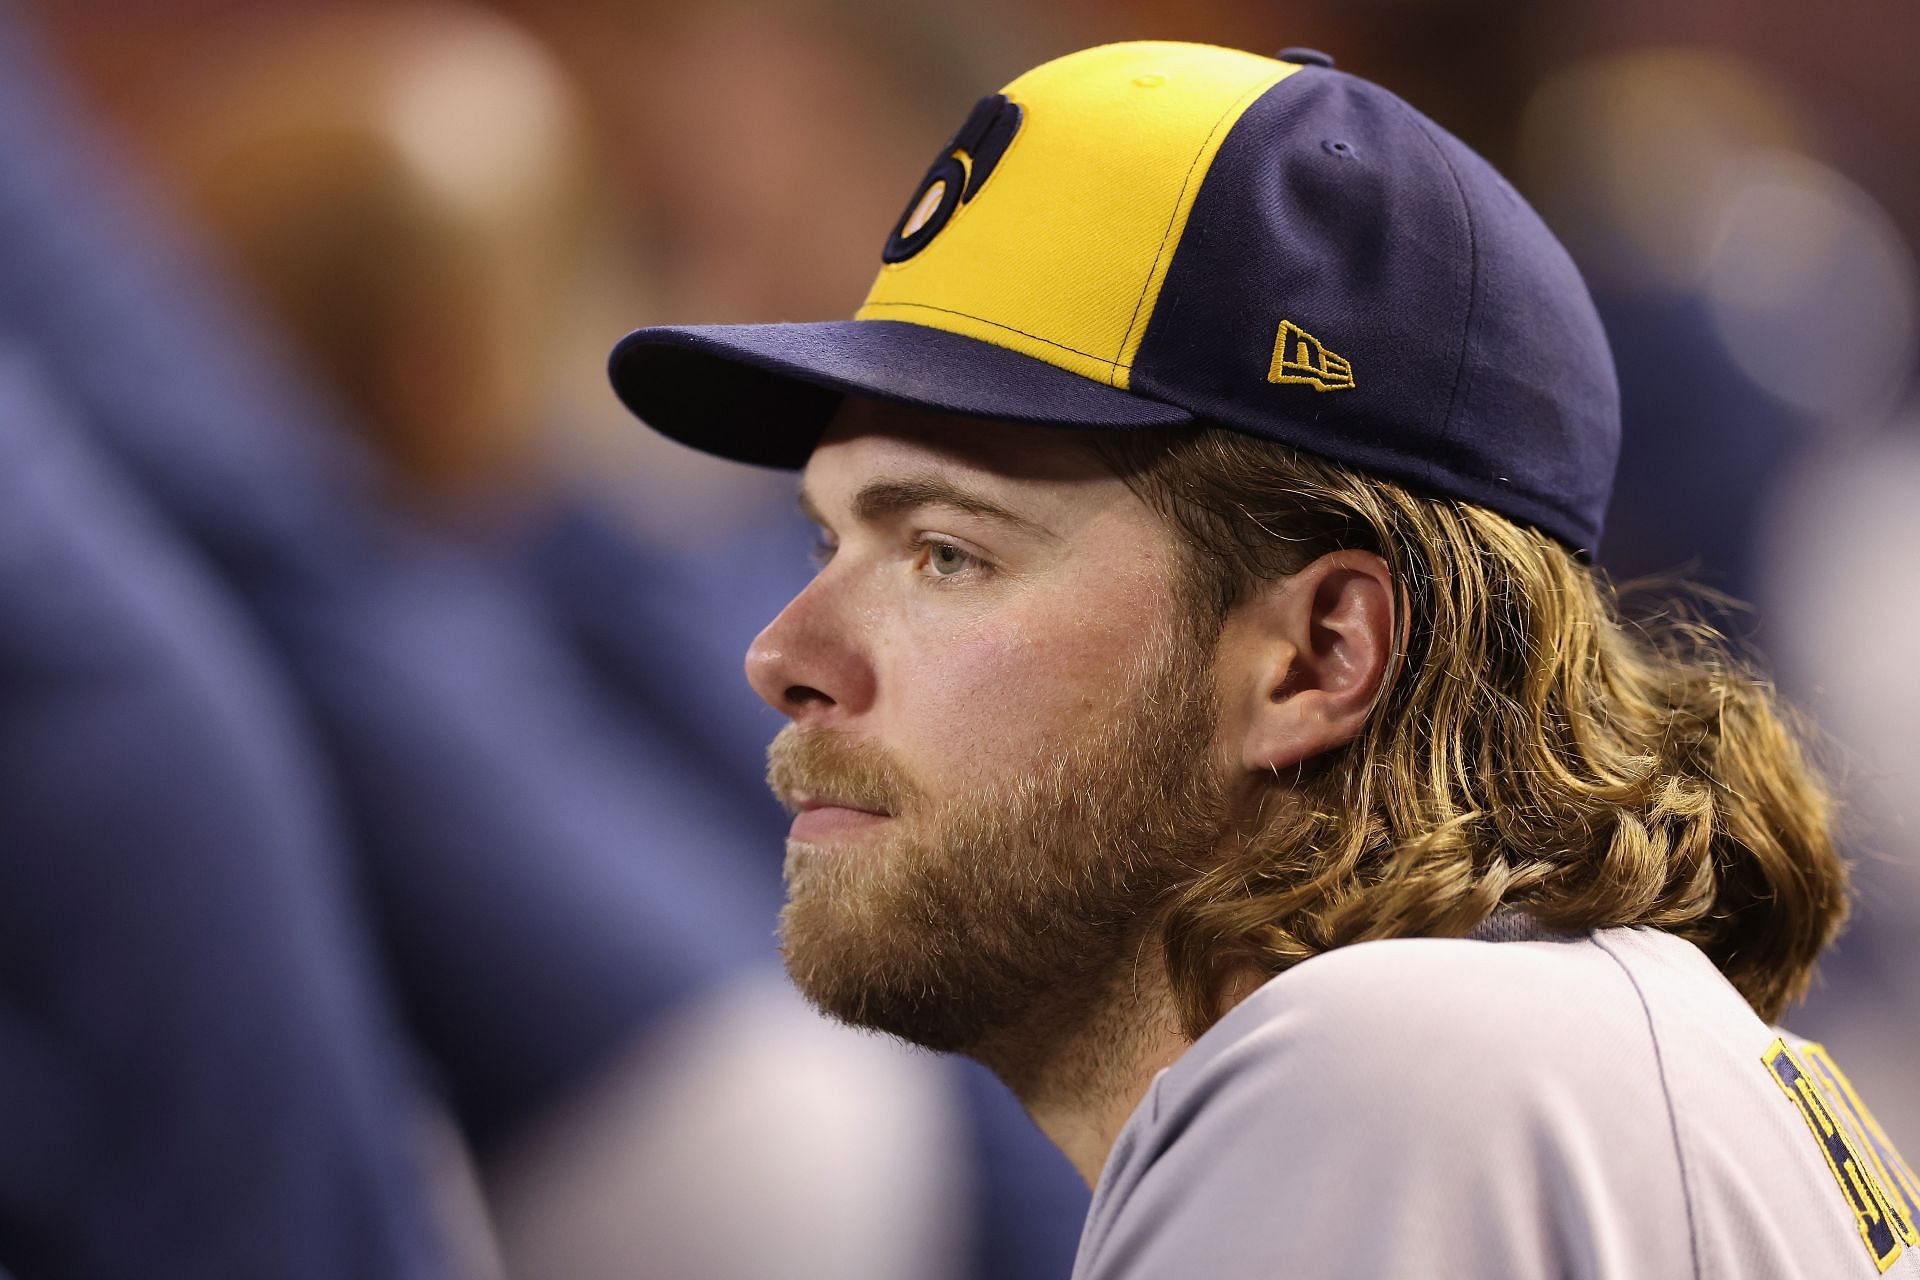 The Brewers did their Ace Corbin Burnes wrong in arbitration